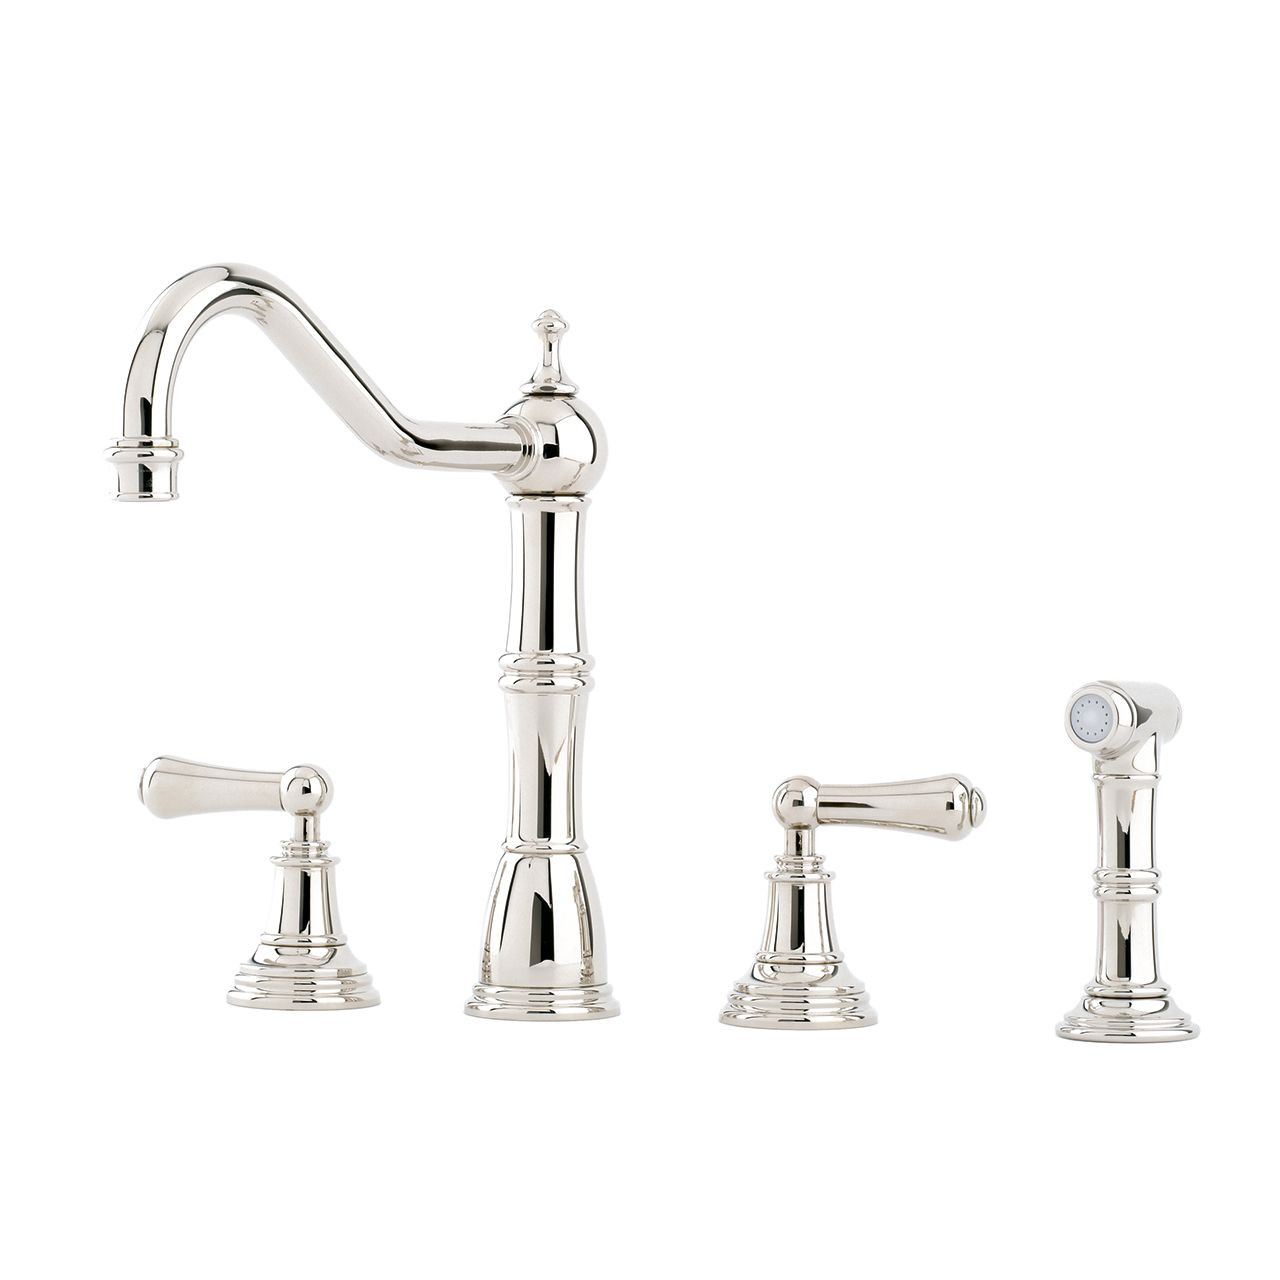 An image of Perrin and Rowe Alsace 4776 Mixer Tap with Lever Handles and Rinse